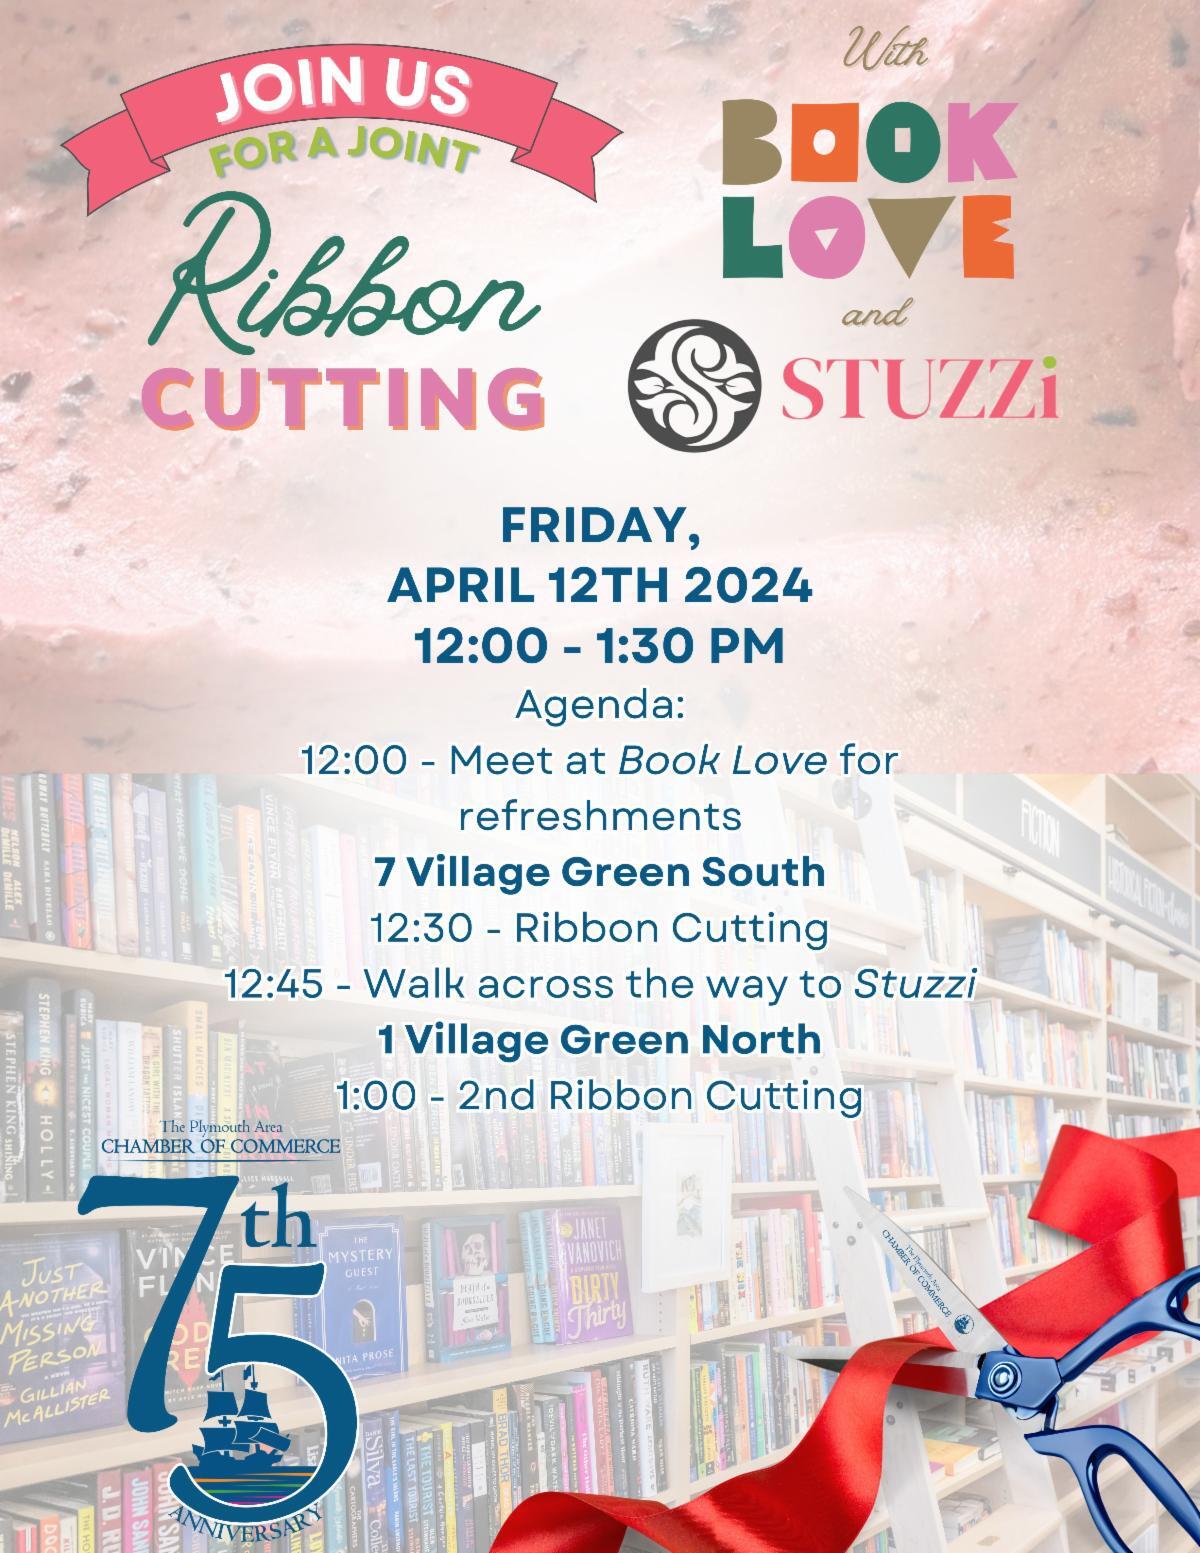 RSVP for Joint Ribbon Cutting for STUZZi and Book Love